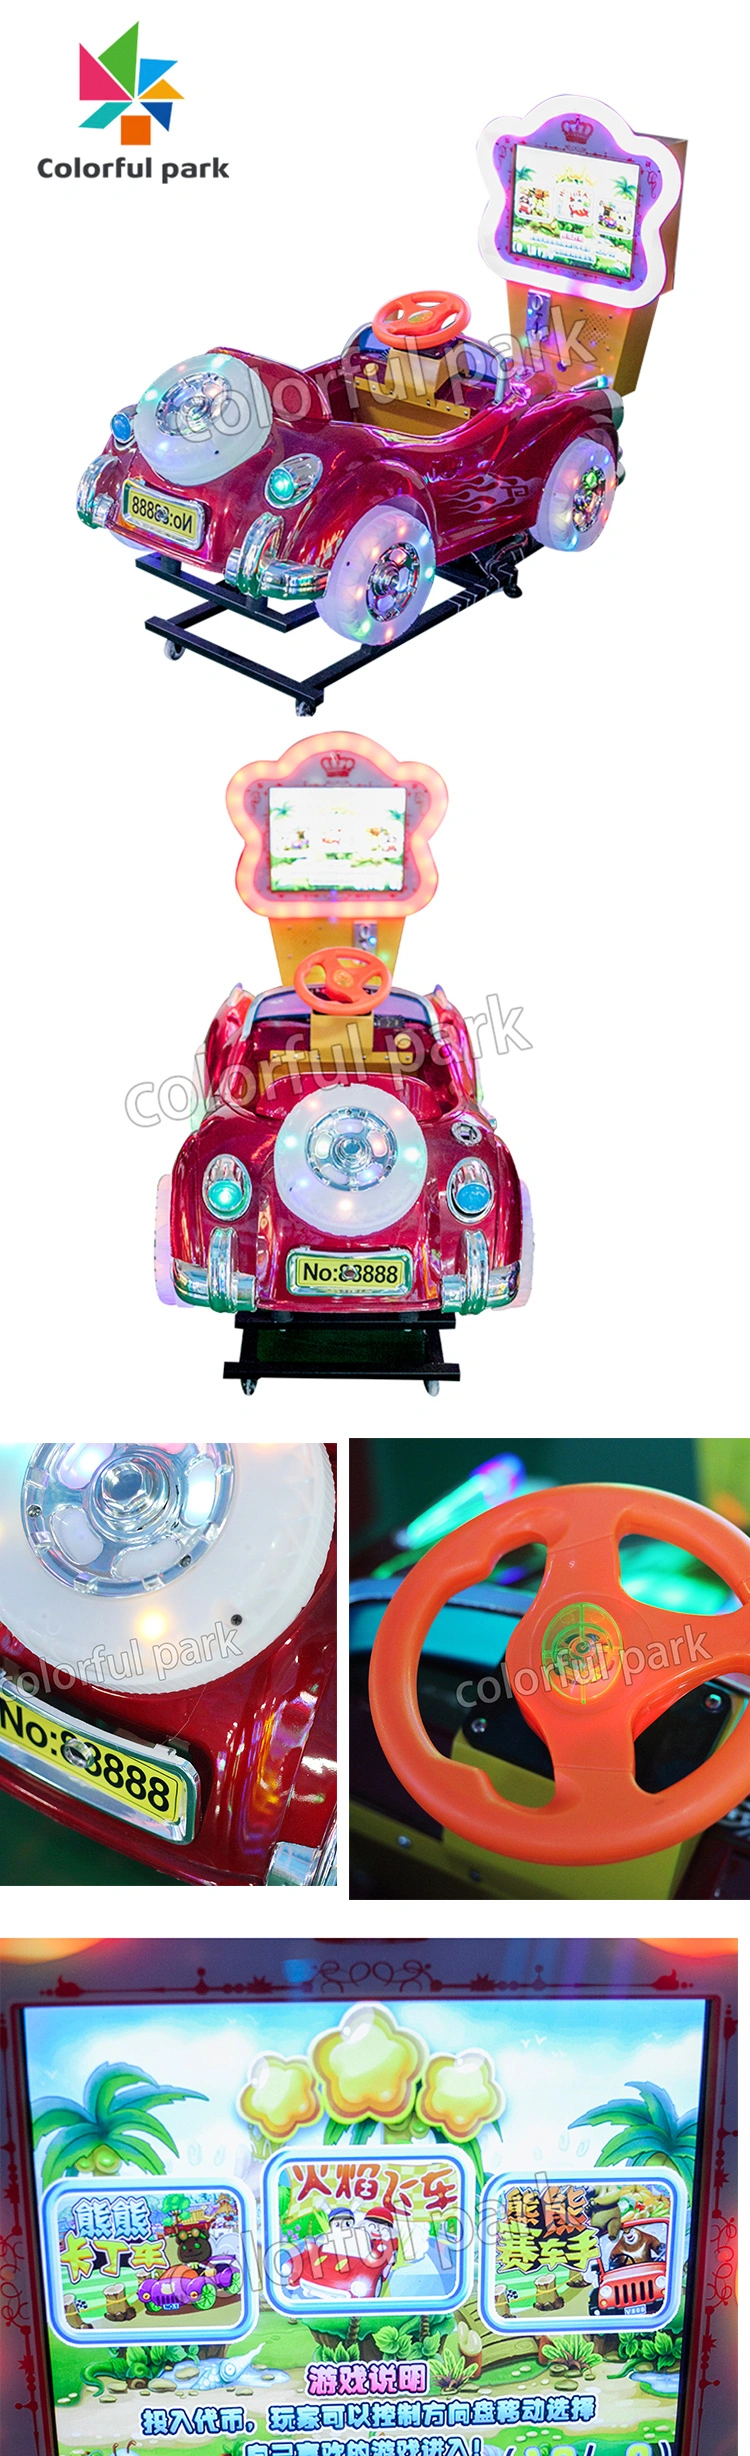 Colorful Park Coin Operated Happy Car Racing Video Game Machine Kids Arcade Game